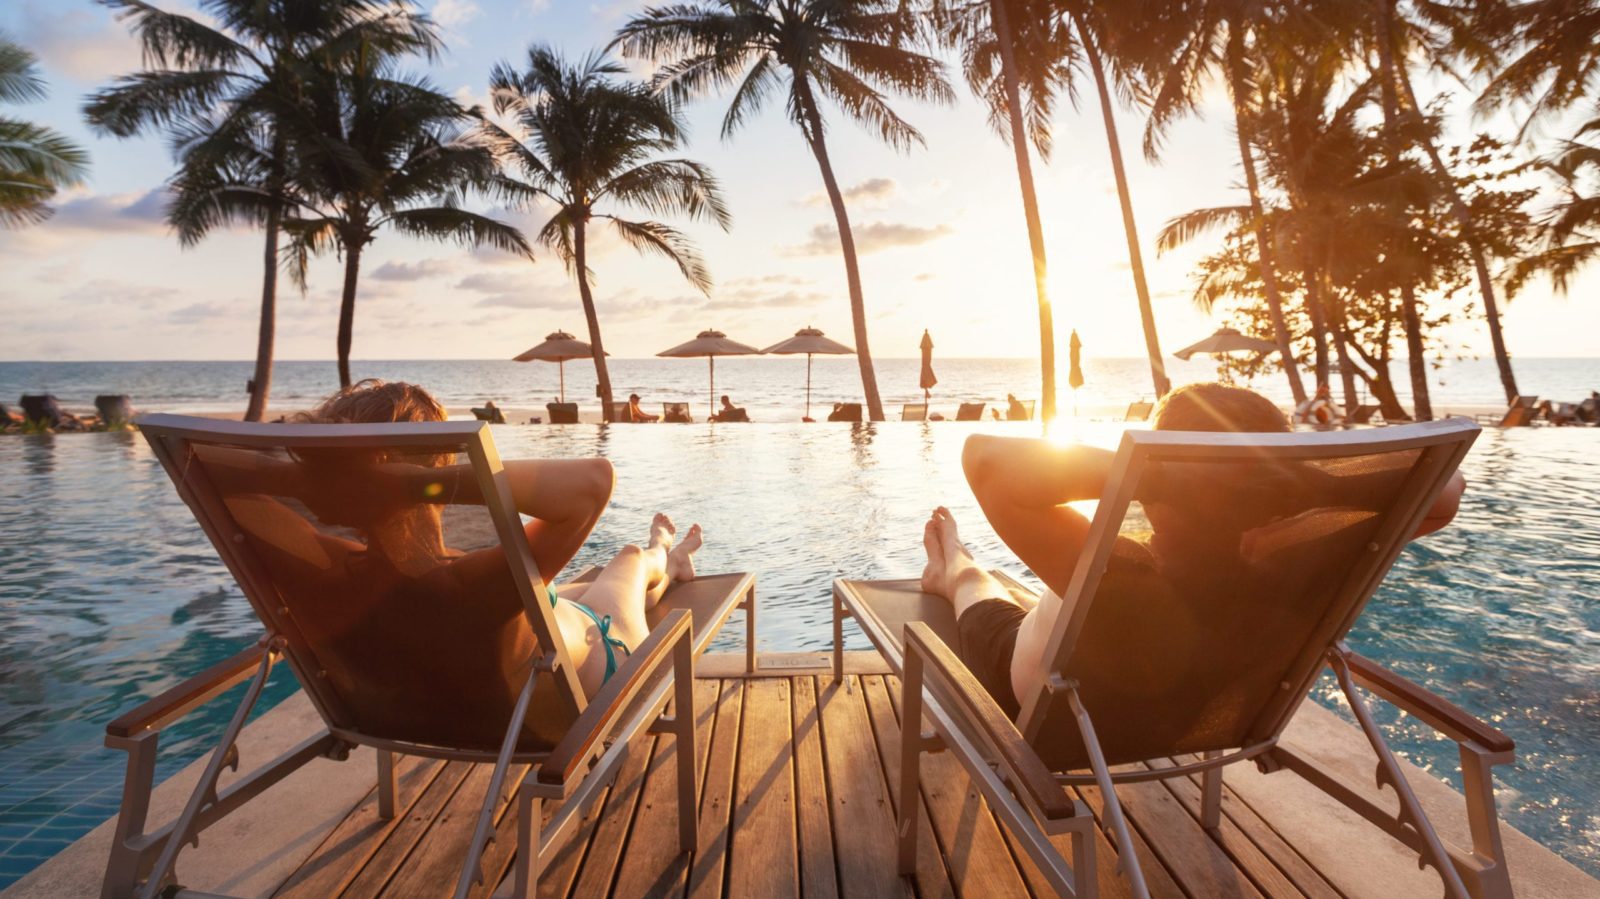 Couple in lounge chairs overlooking water (Photo: Shutterstock)